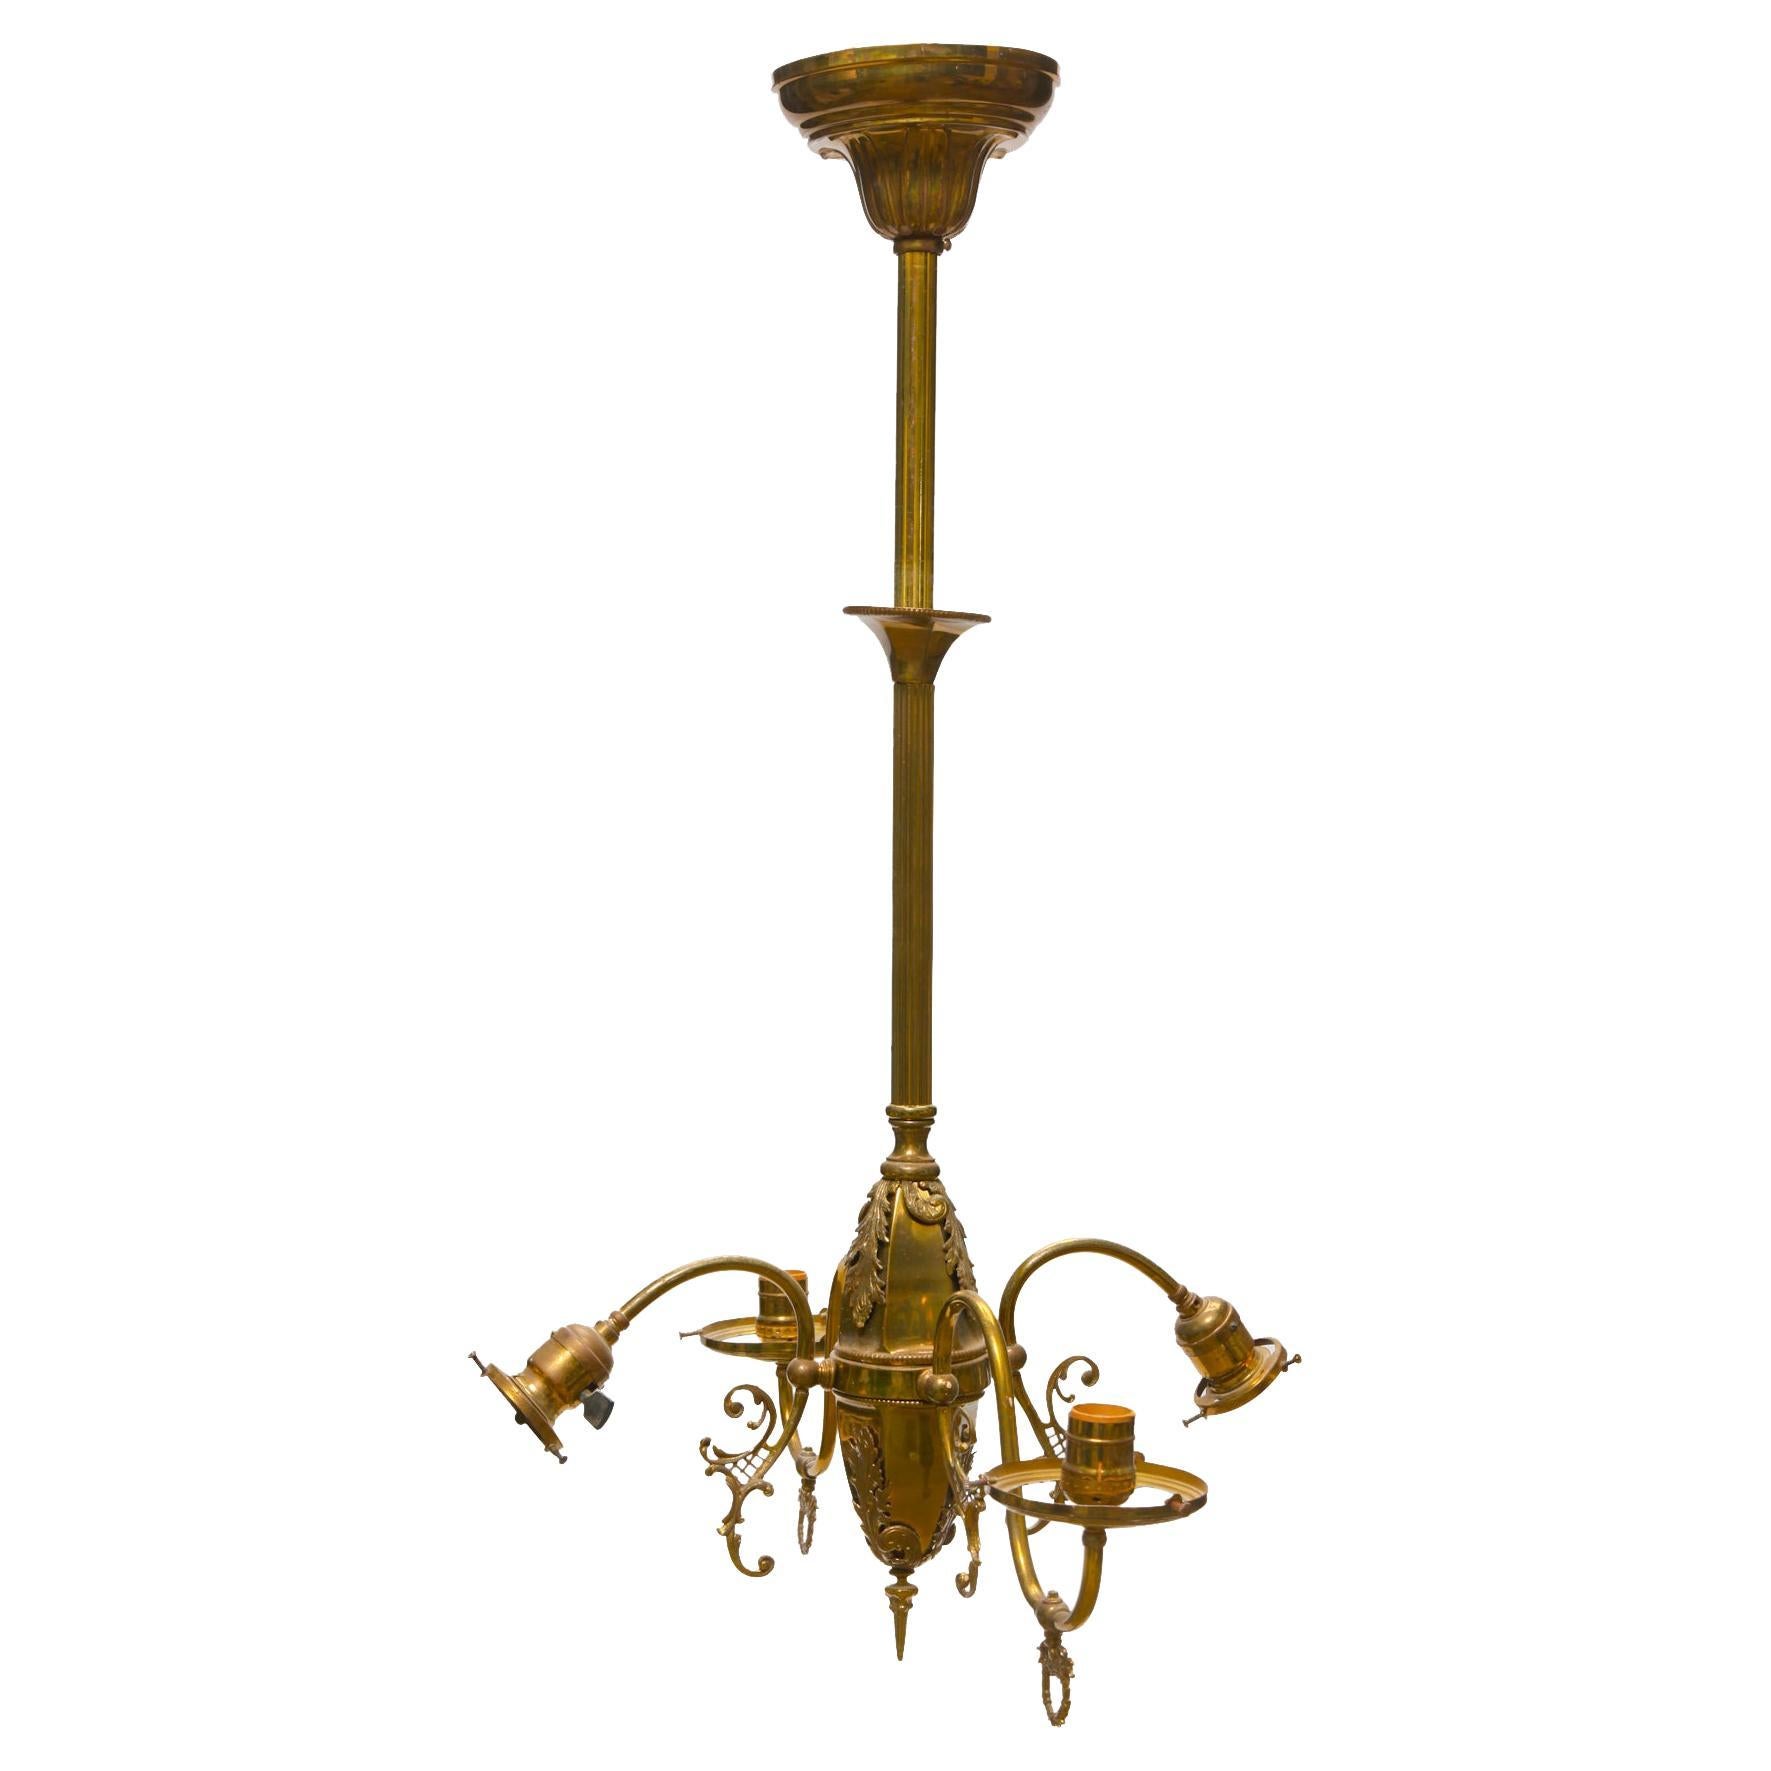 Antique light fixture, incomplete, with a high polished brass finish.   For Sale